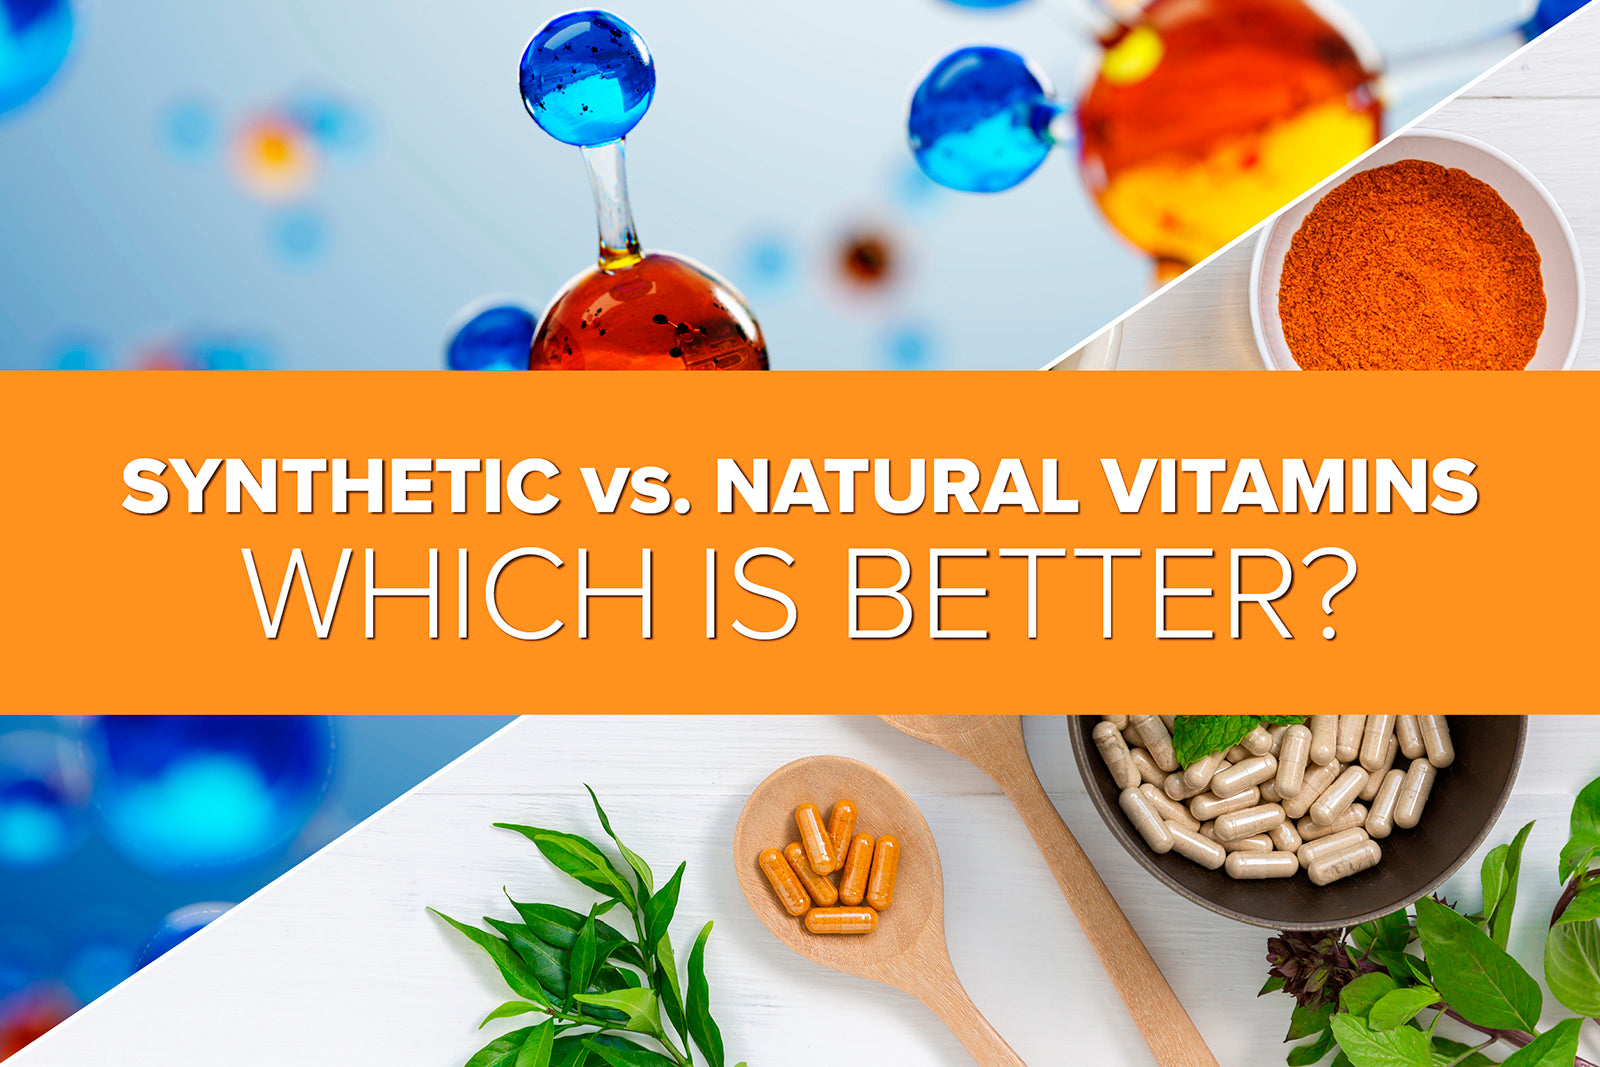 Synthetic vs. Natural Vitamins: Which is Better?